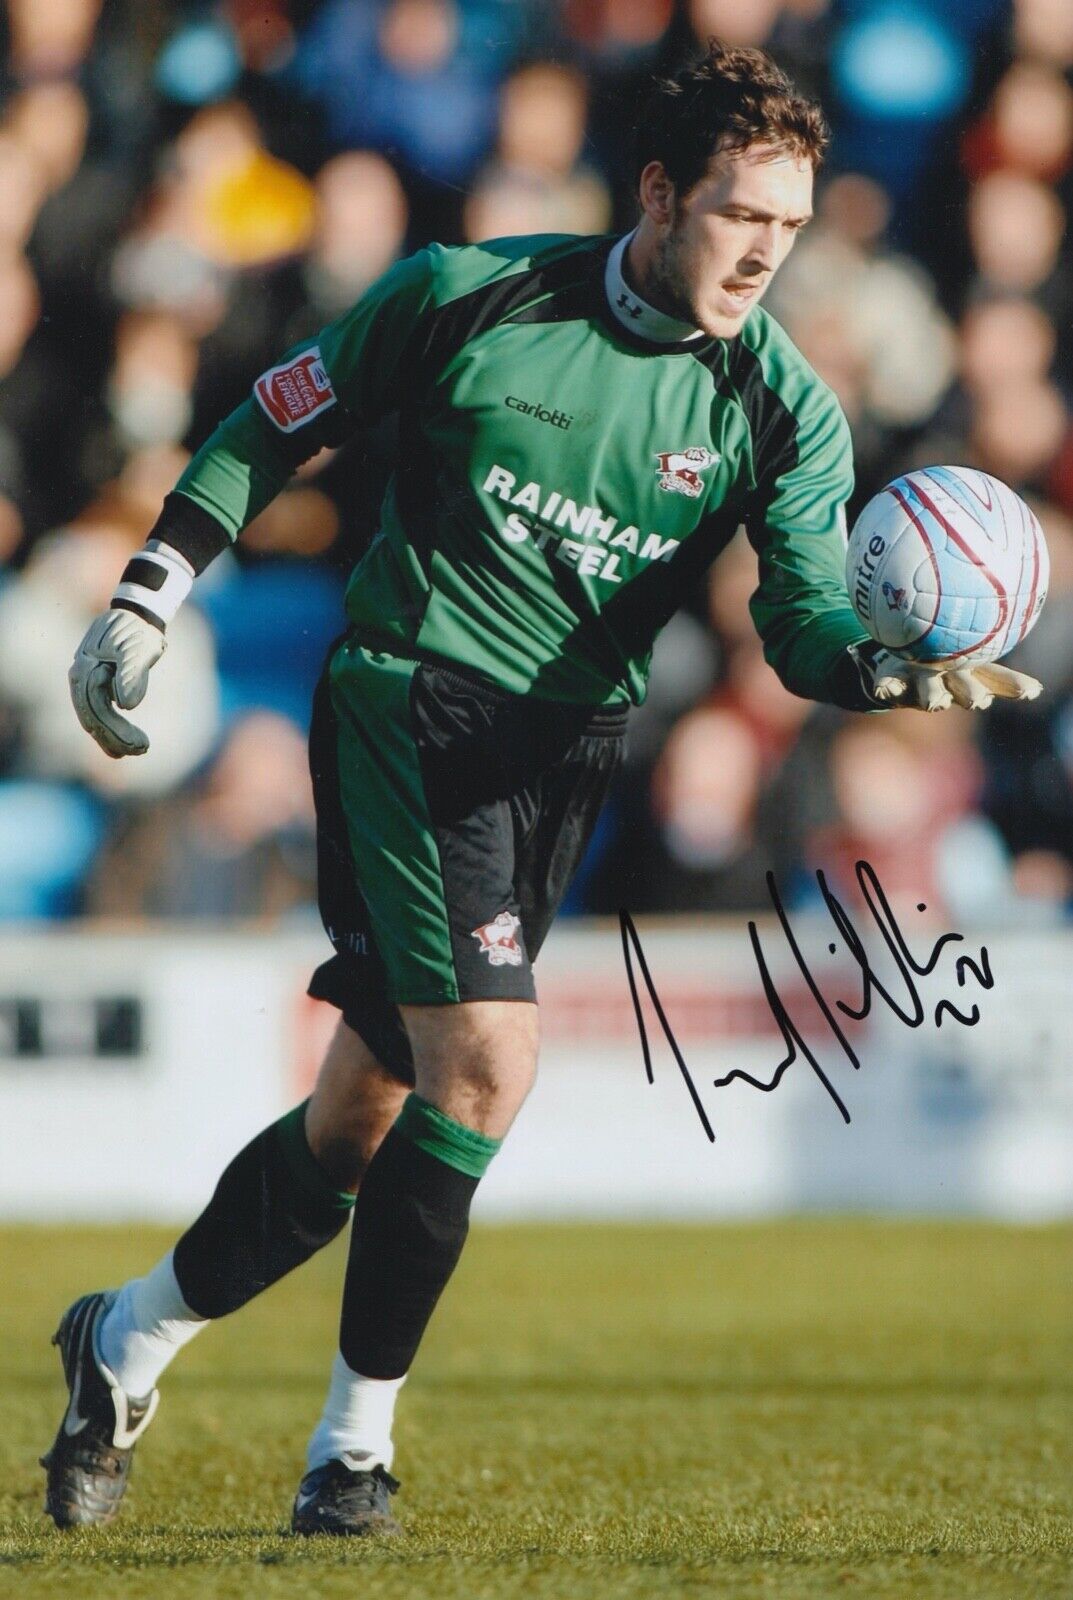 Josh Lillis Hand Signed 12x8 Photo Poster painting - Scunthorpe United Football Autograph.